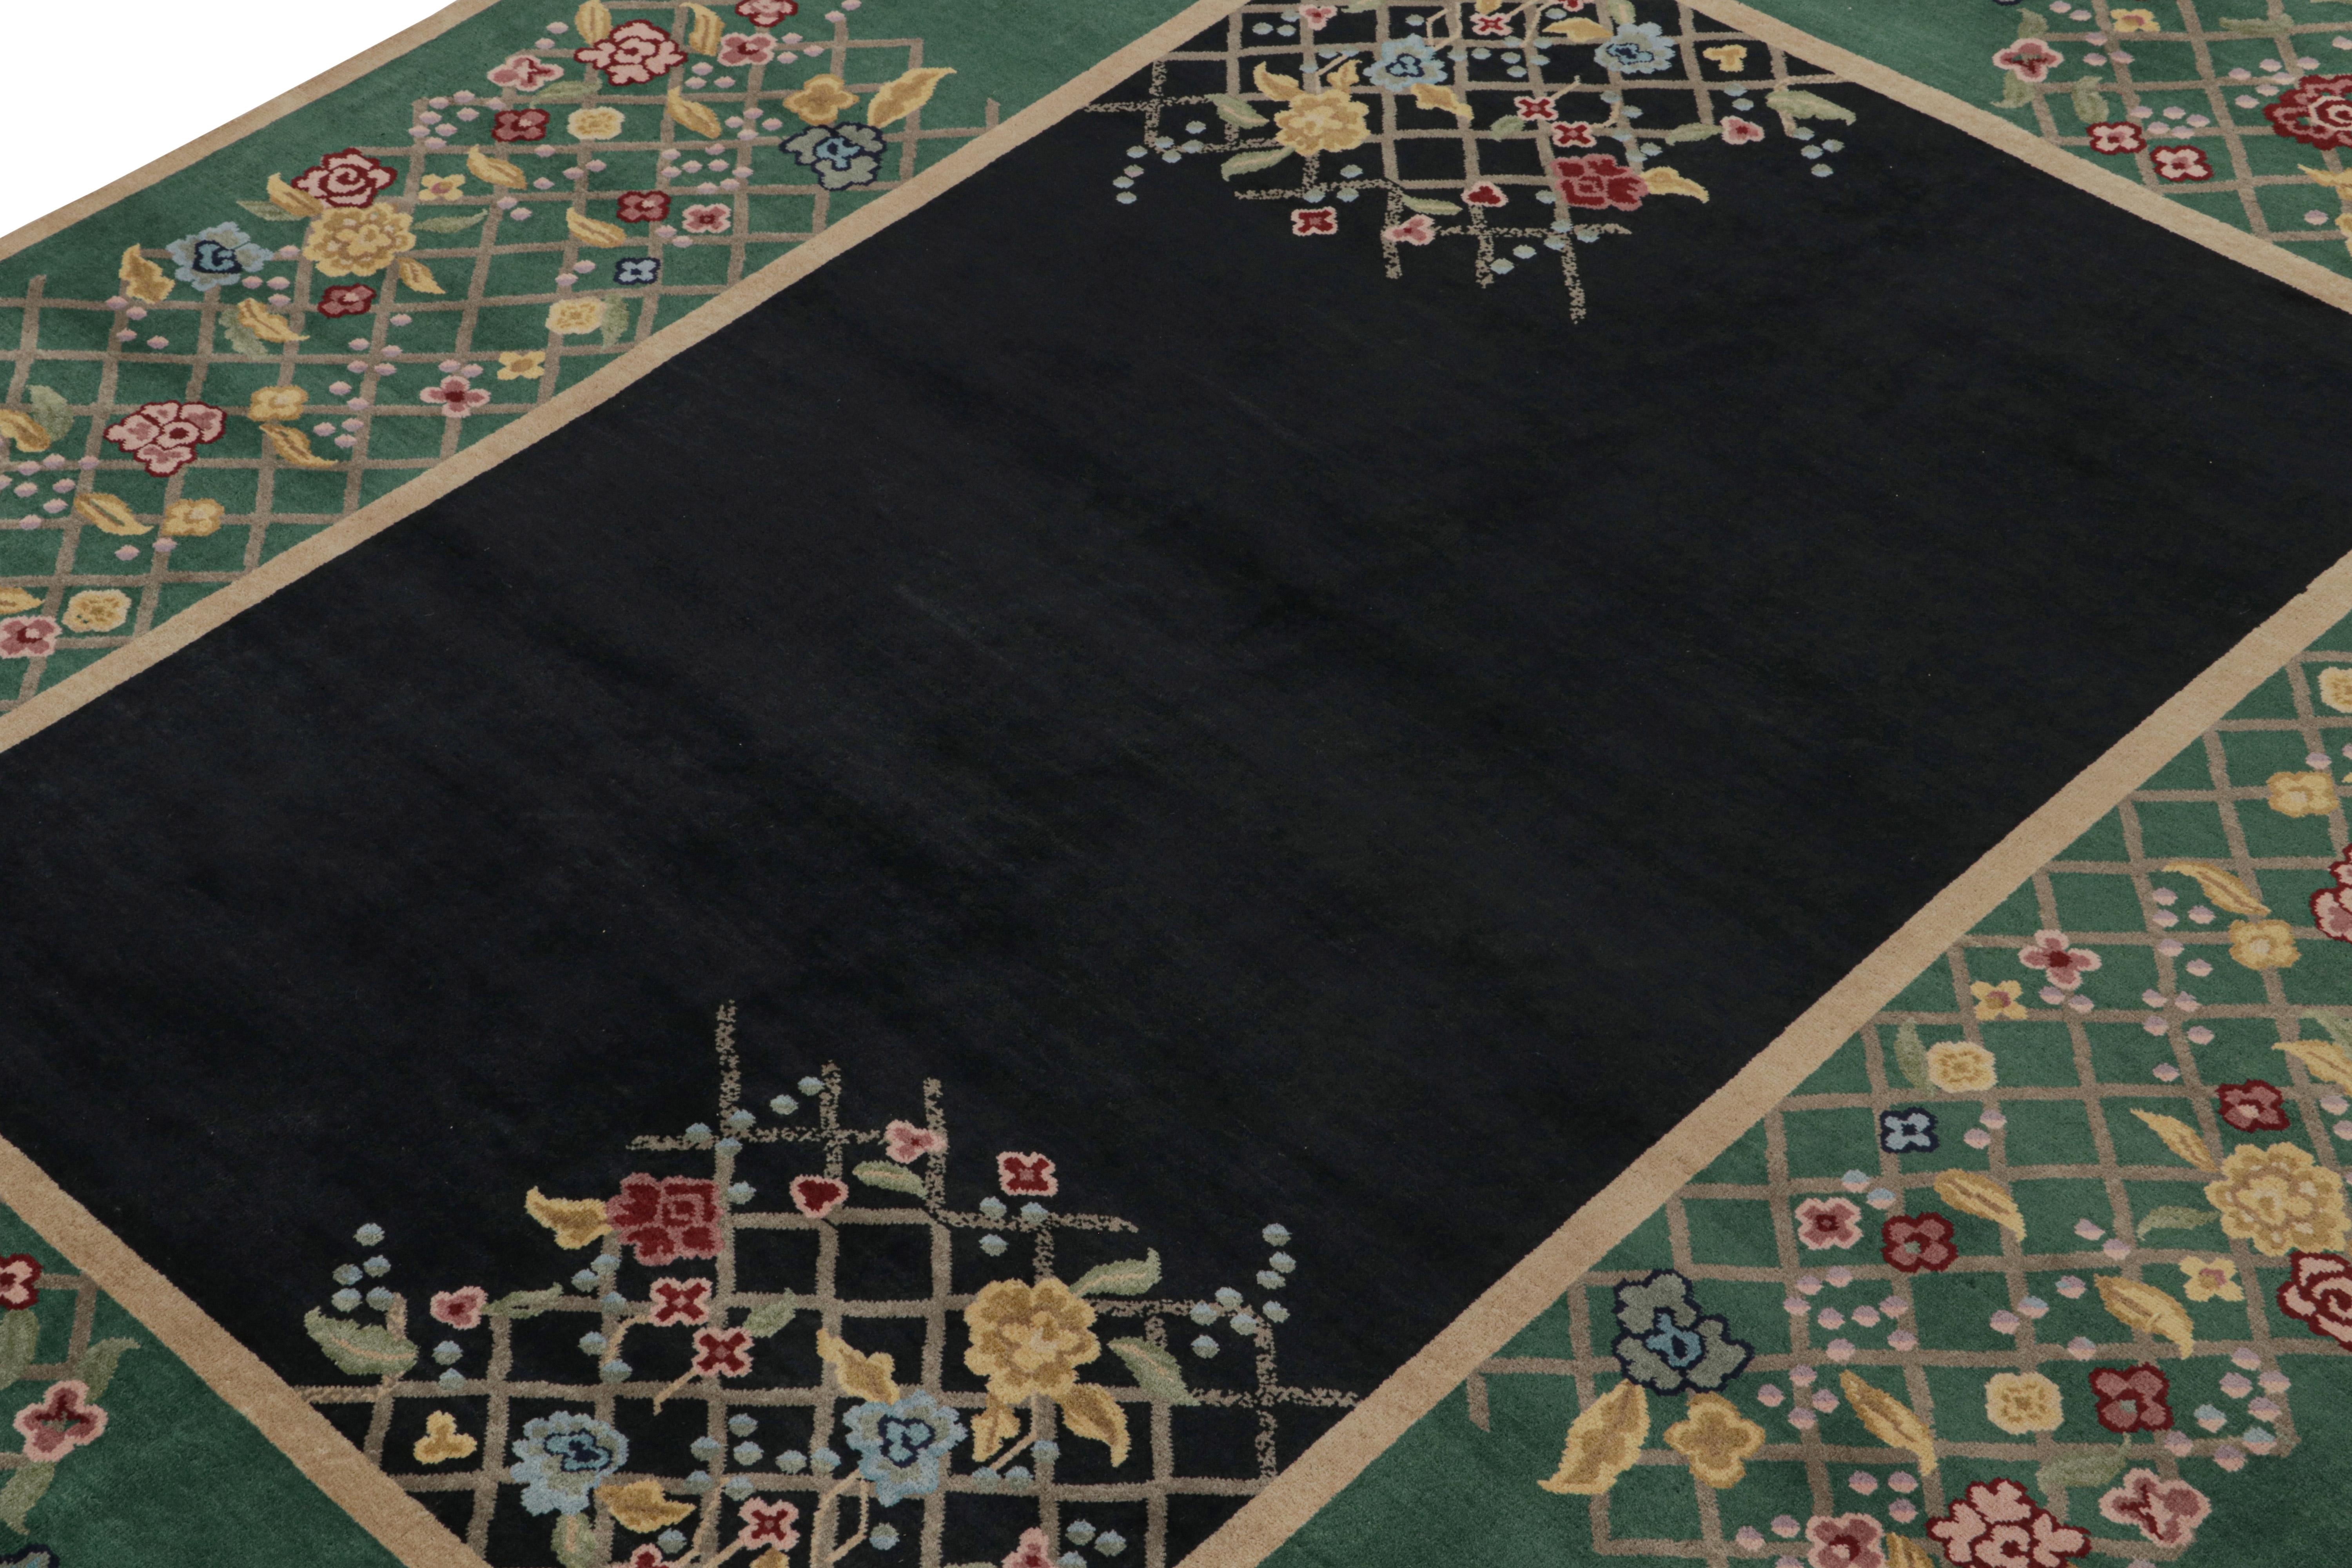 This 9x11 rug is an exciting new addition to the contemporary Art Deco rug collection by Rug & Kilim.

On the Design: 

Hand-knotted in wool, this rug is inspired by the Chinese Art Deco rug style of the 1920s. Its design enjoys a black field